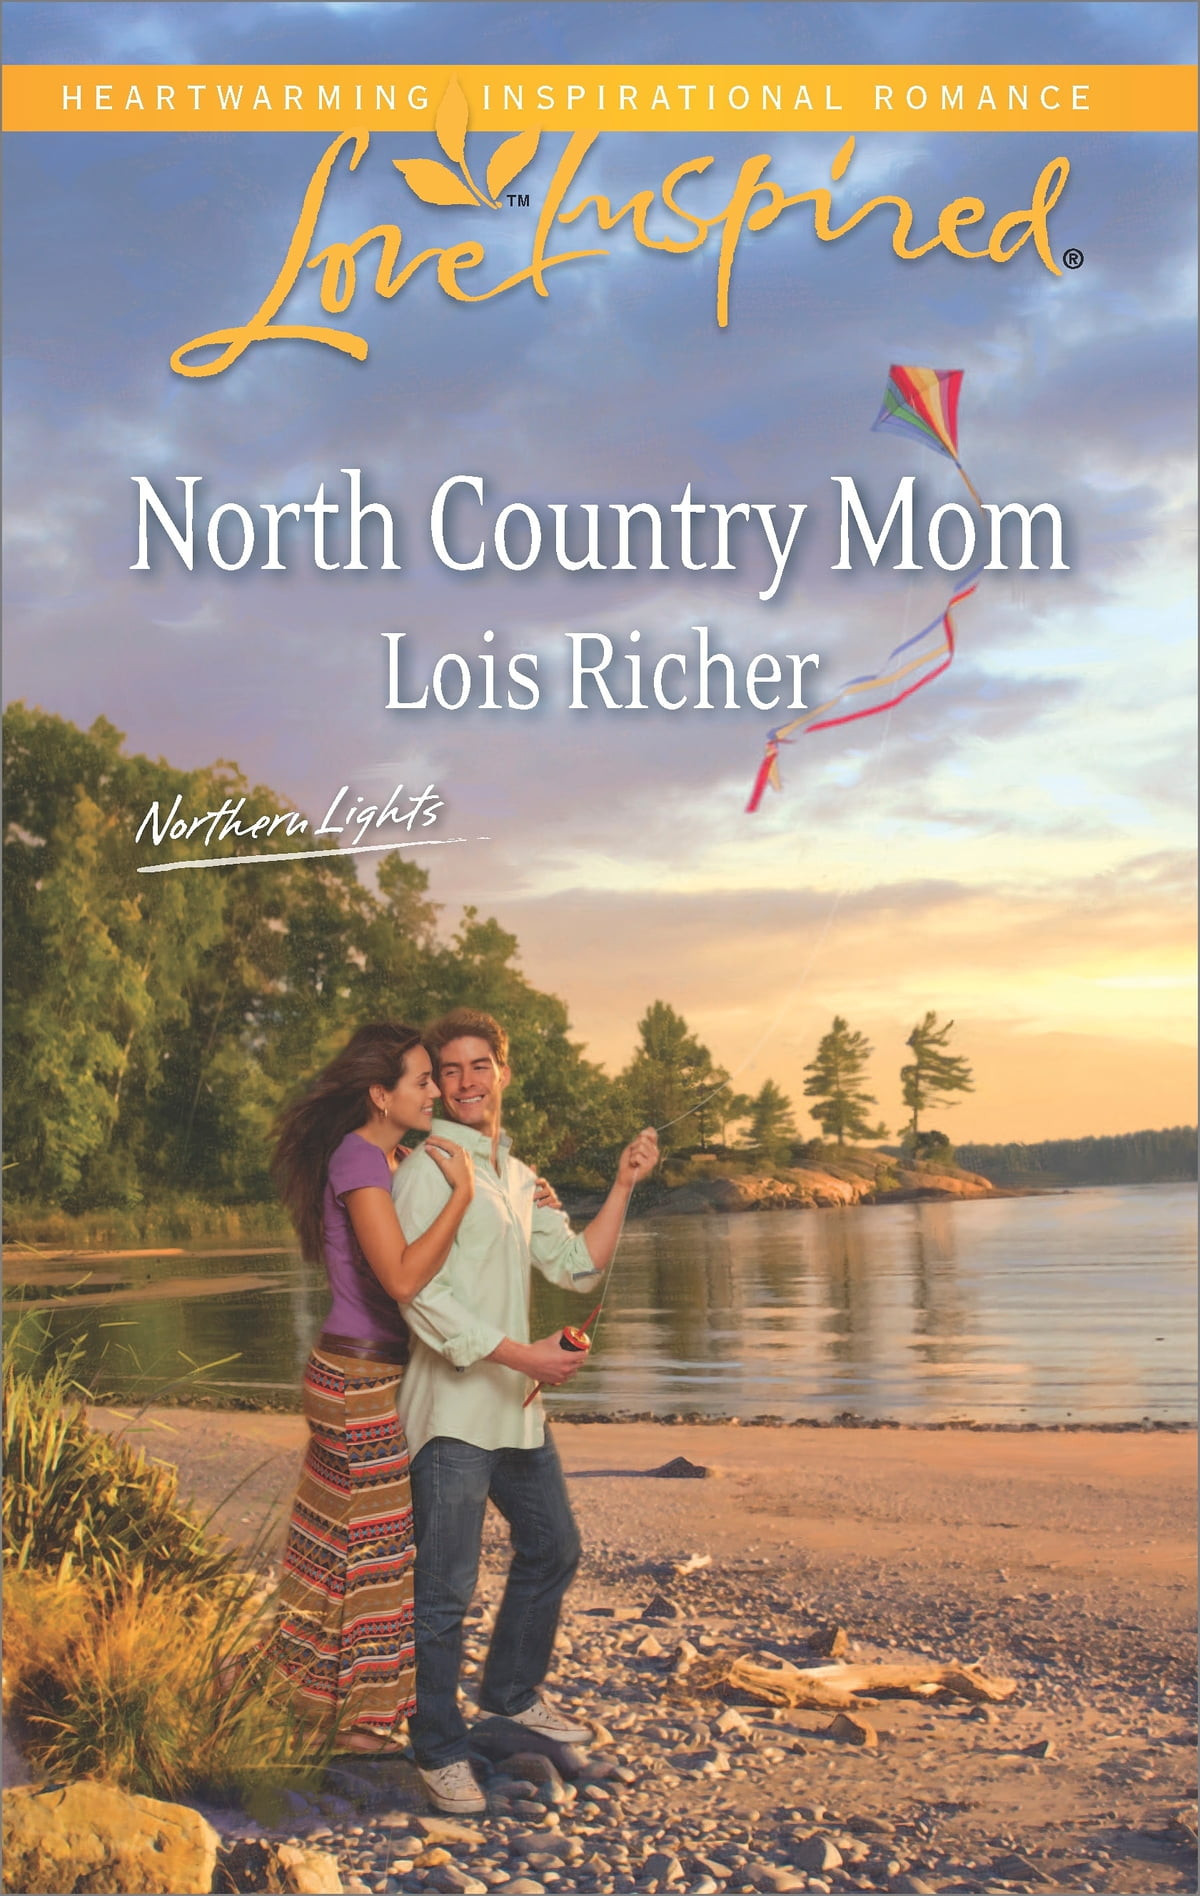 North Country Mom (Northern Lights #3)